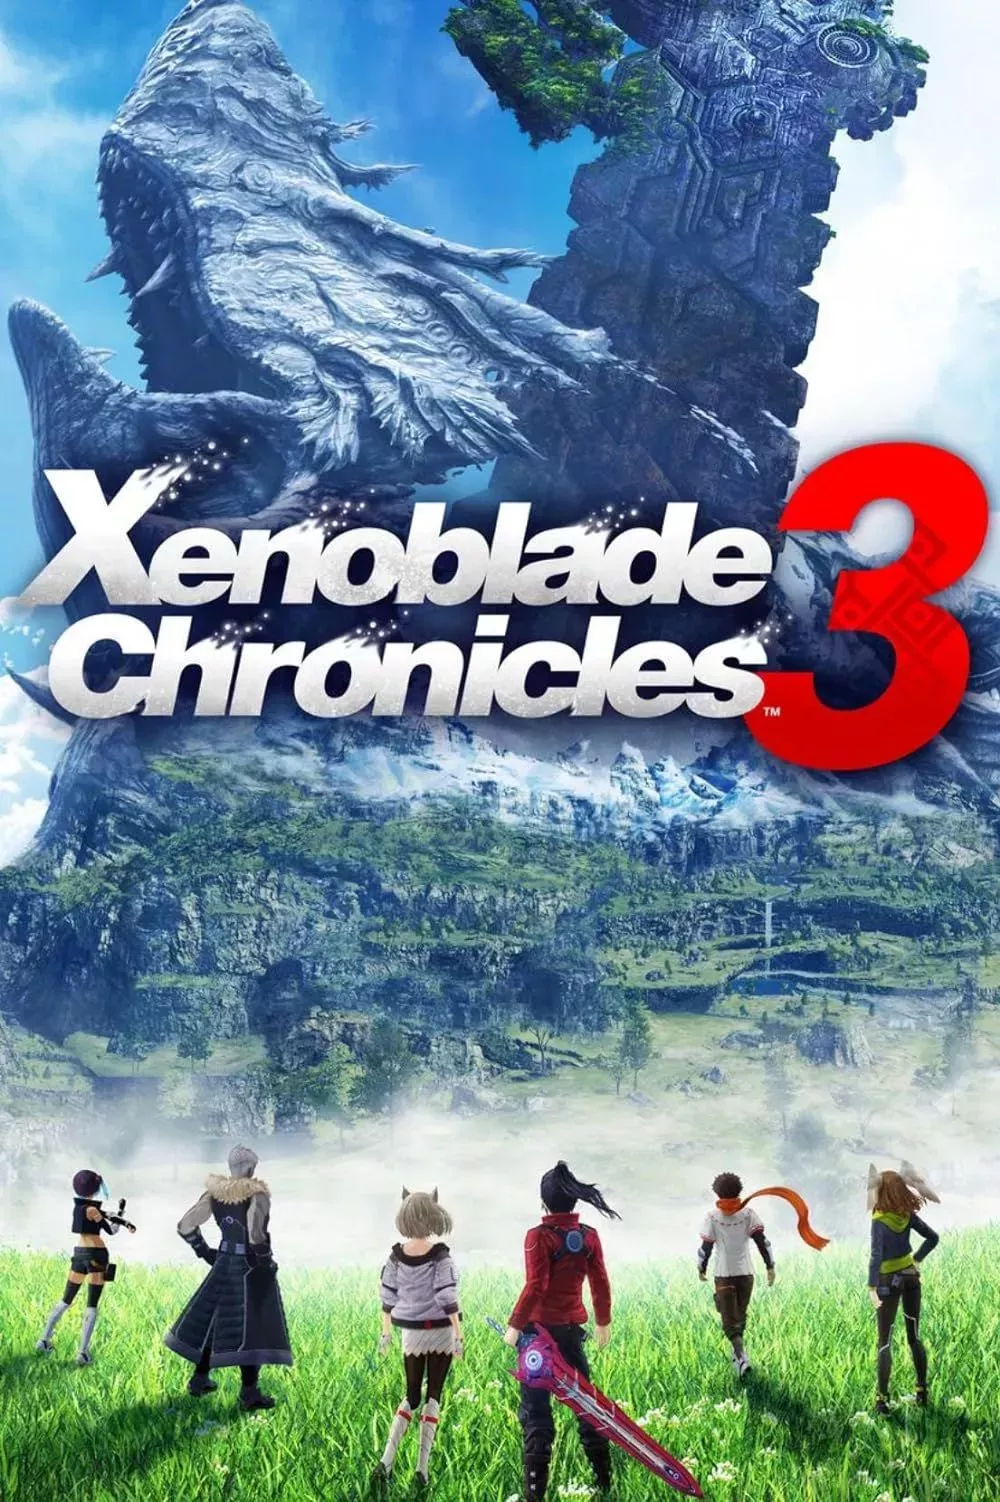 Cover art of Xenoblade Chronicles 3 with the characters getting closer to a monster in the distance